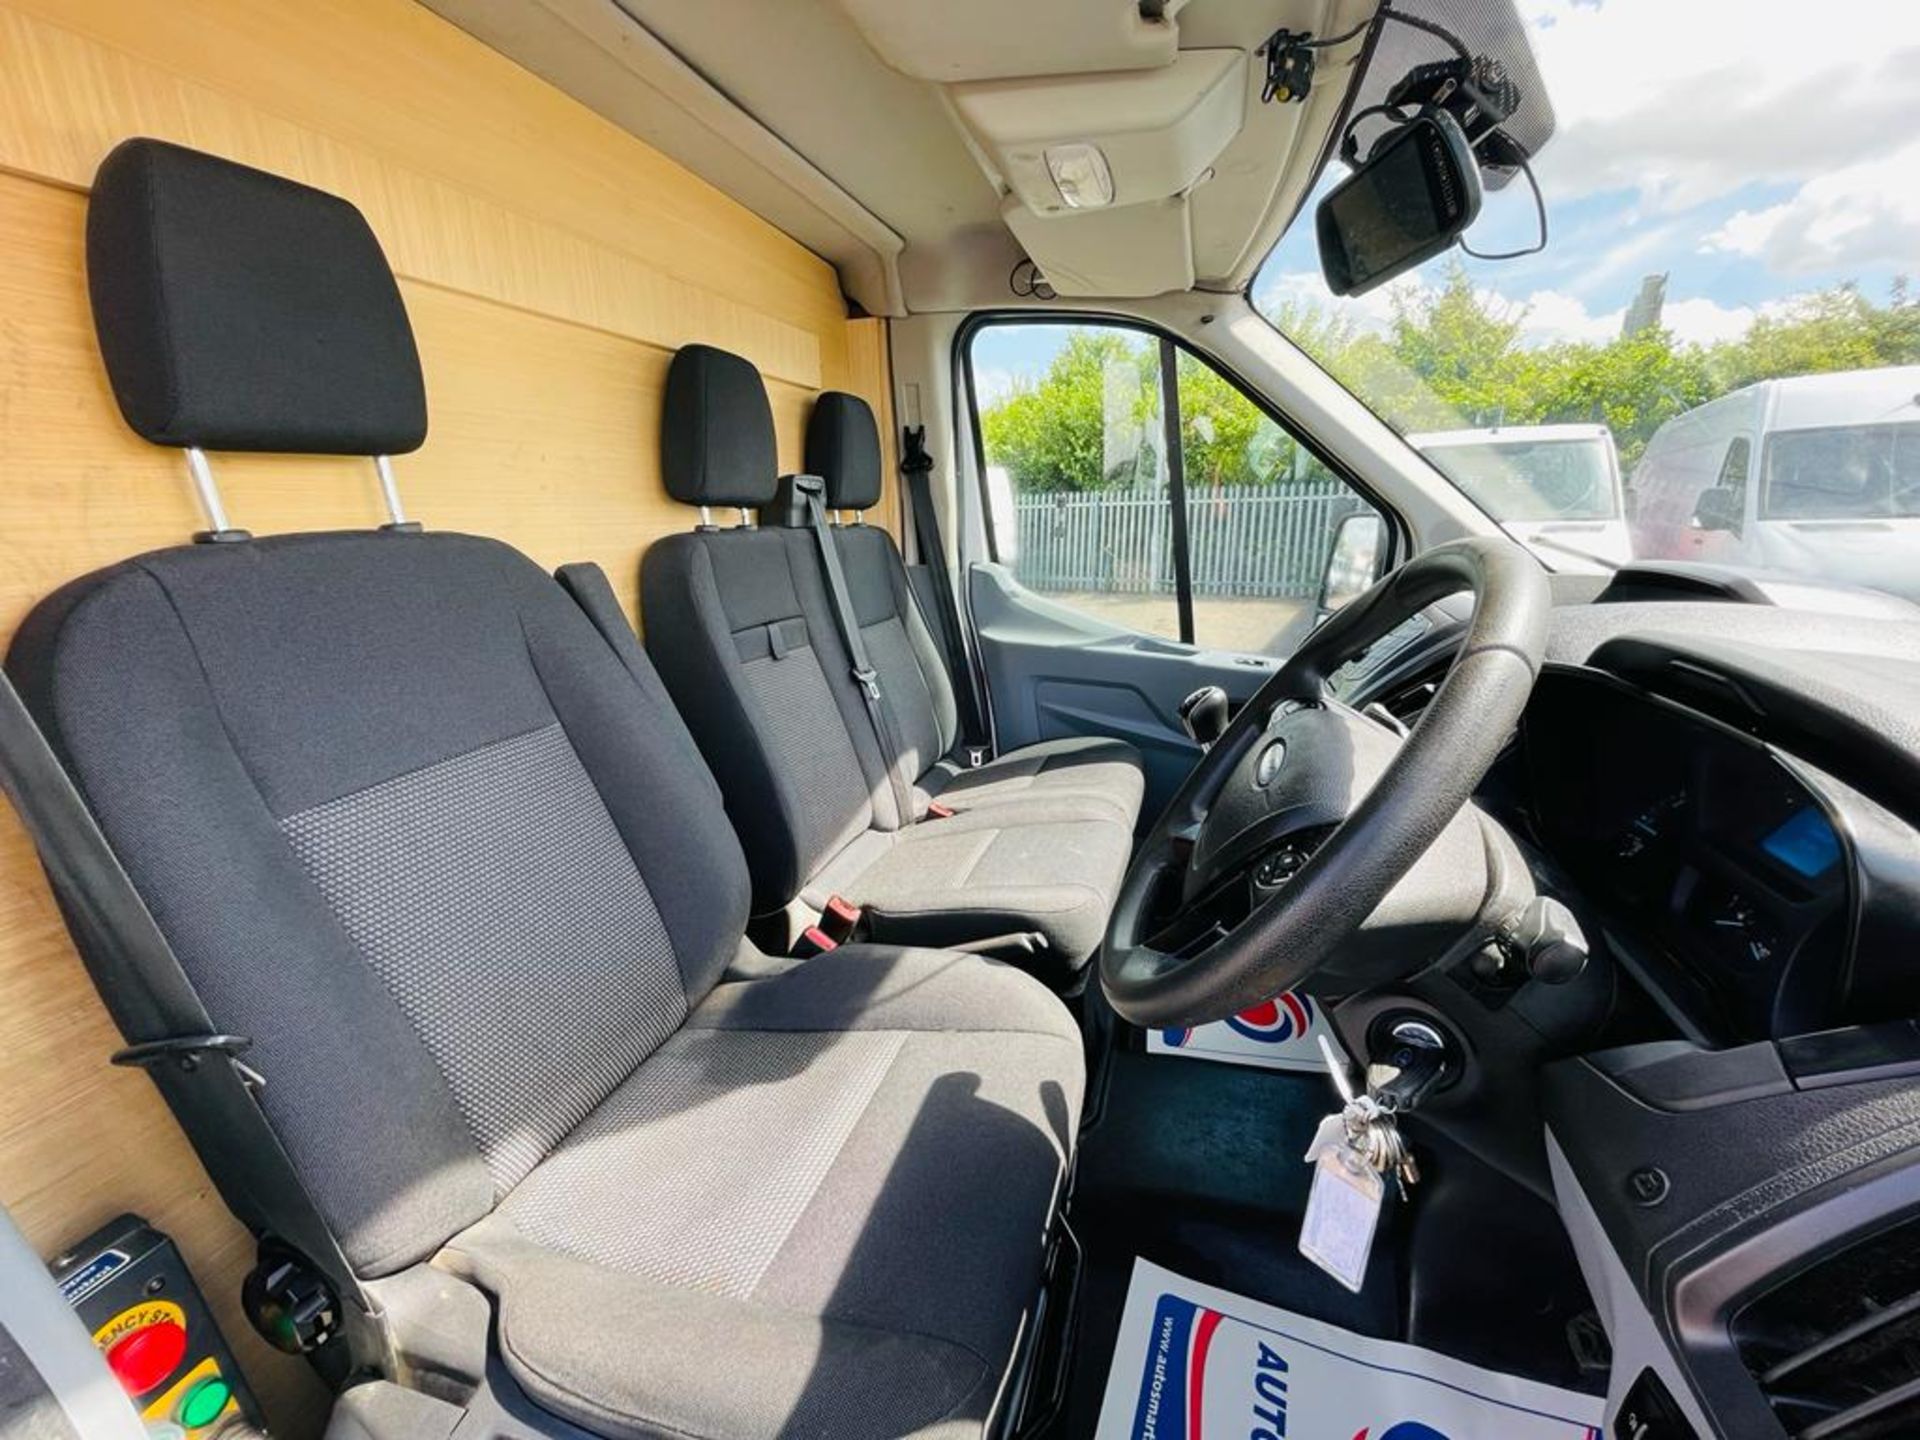 ** ON SALE **Ford Transit 2.0 TDCI 130 Double Cab Tipper 2018 '18 Reg' Euro 6 - ULEZ Compliant - Image 23 of 28